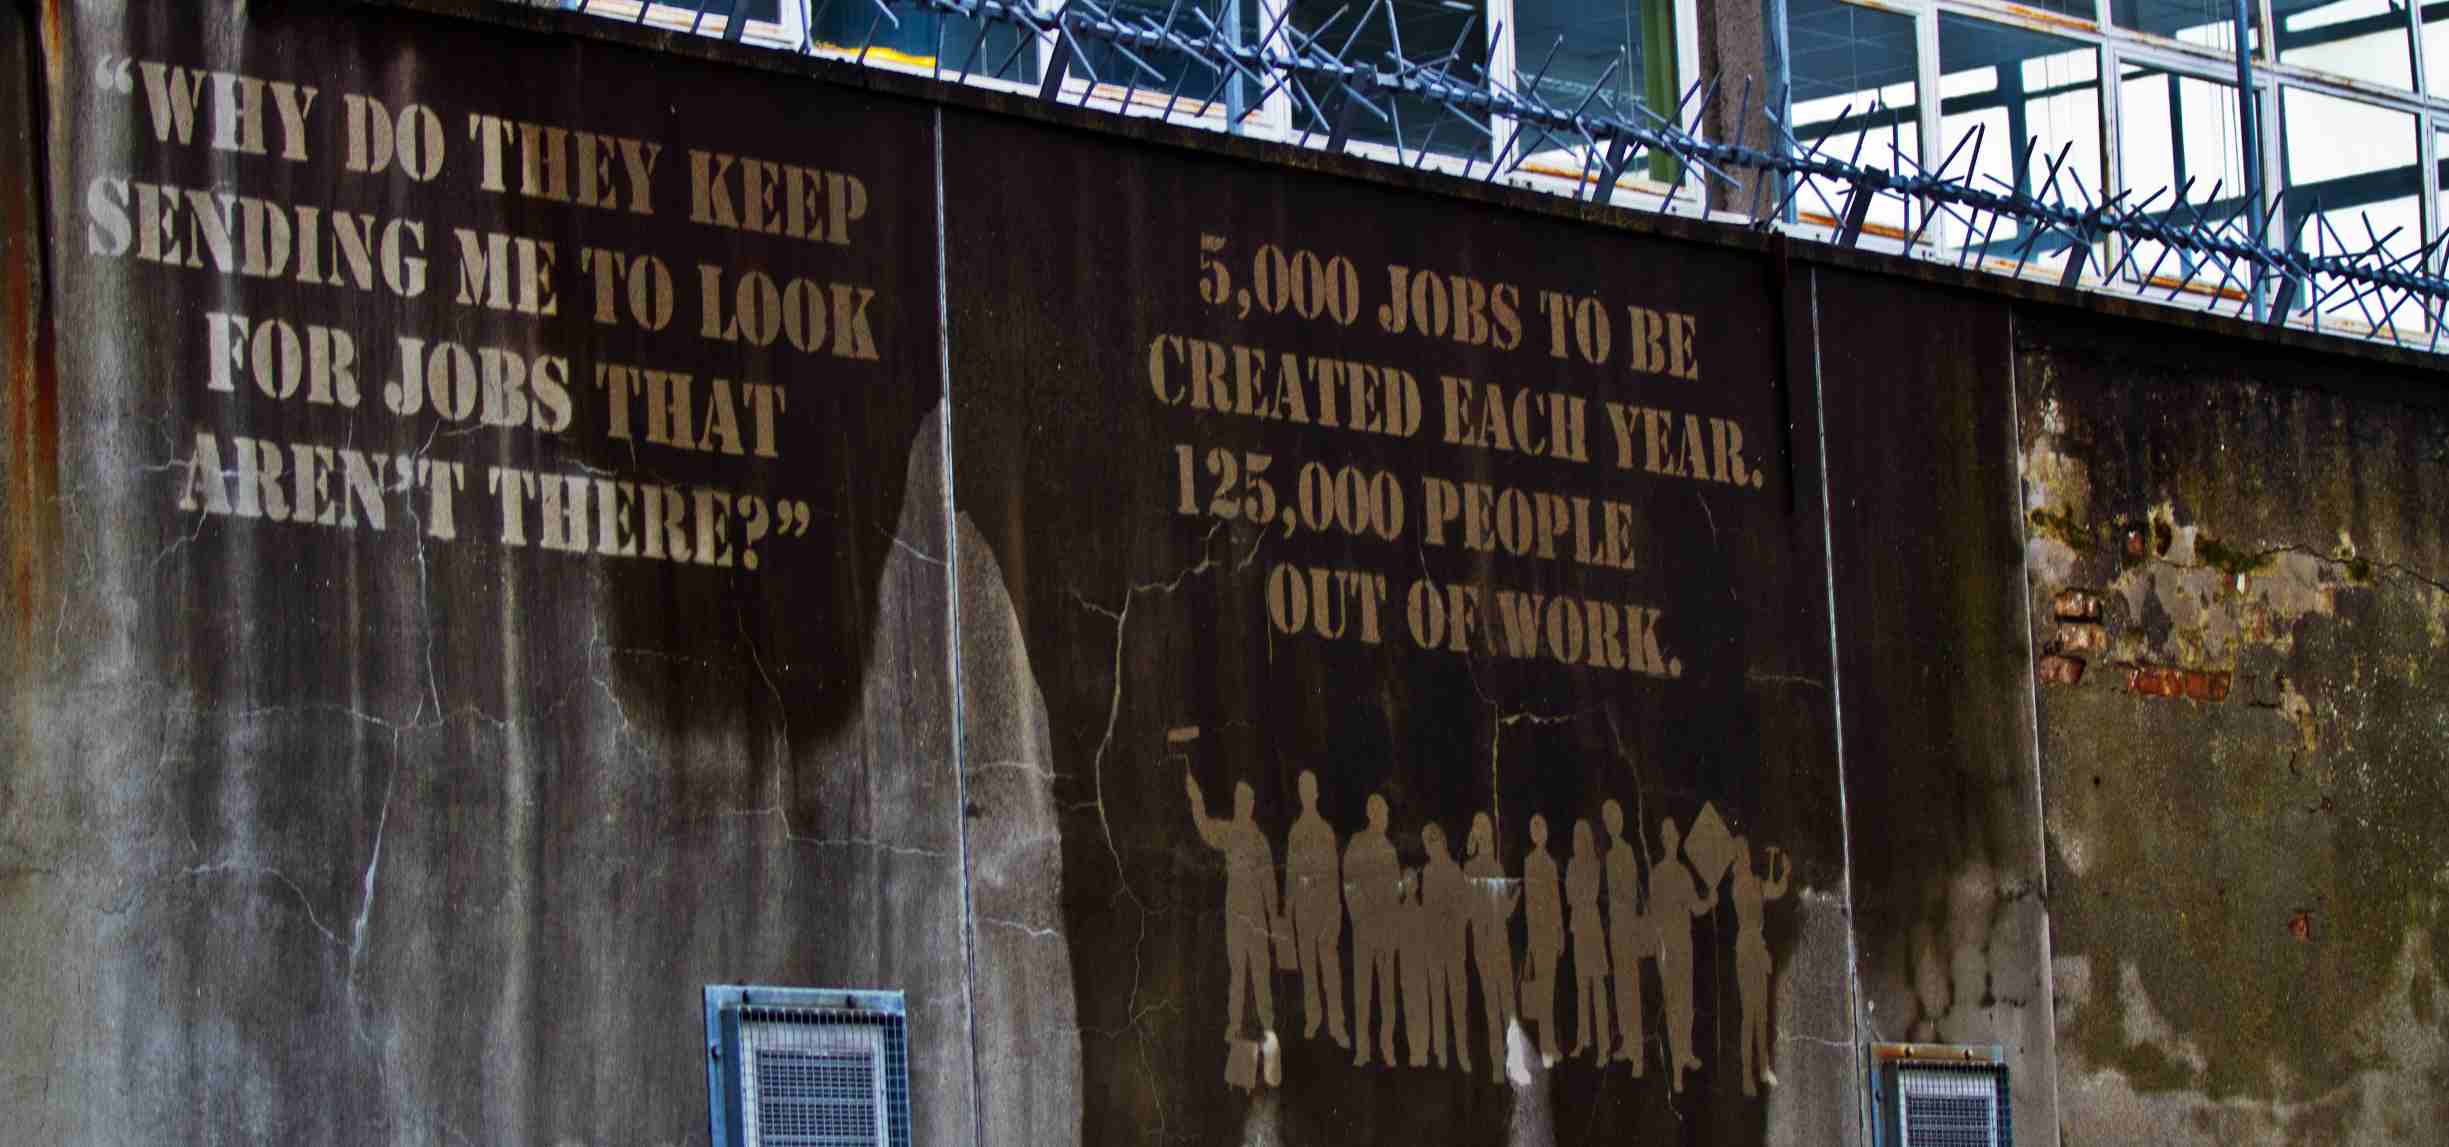 Message stencilled on wall: why do they keep sending me to look for jobs that aren't there?